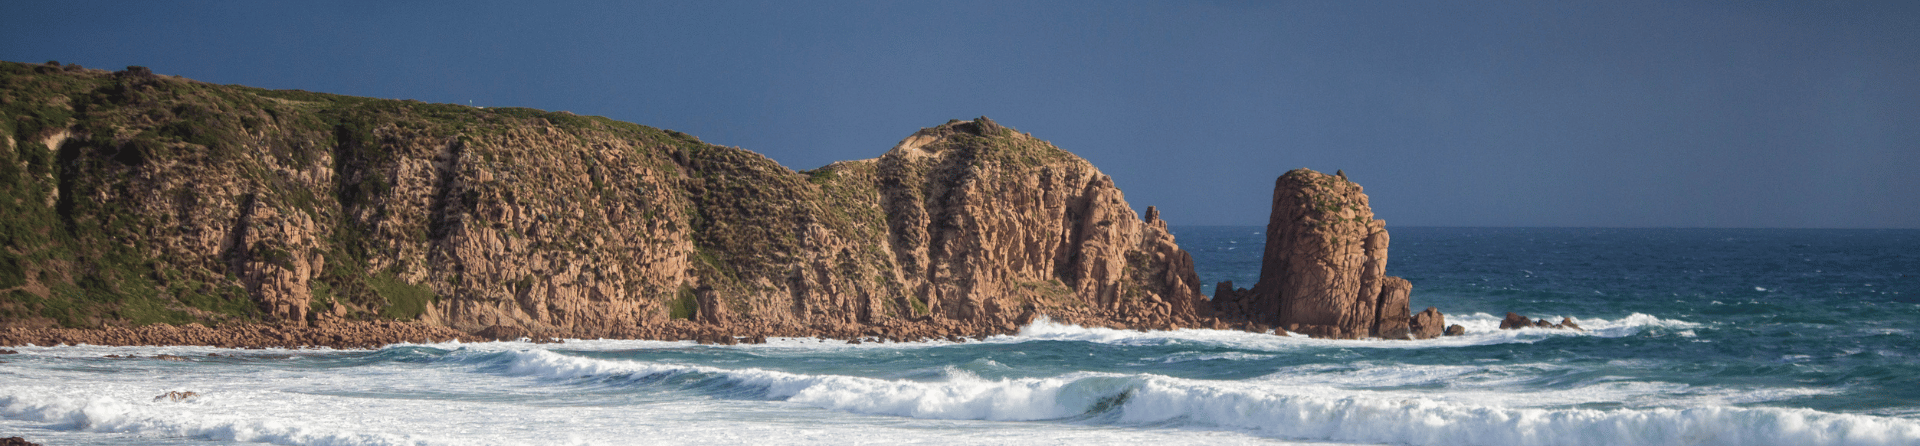 What is there to do in Cape Woolamai?